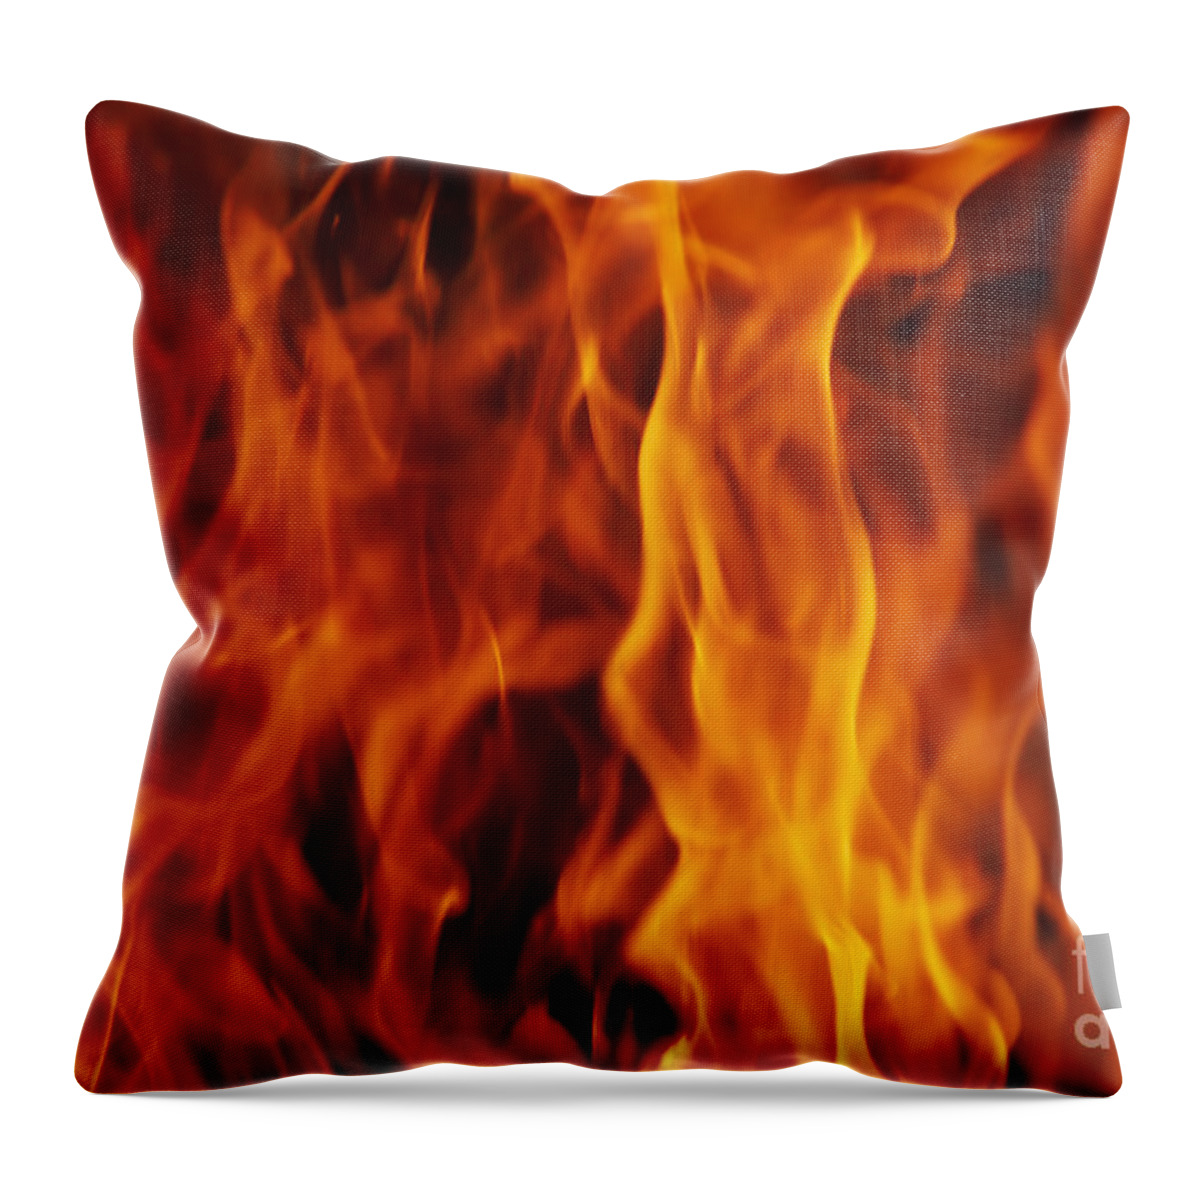 Fire Throw Pillow featuring the photograph Flames by Michal Boubin